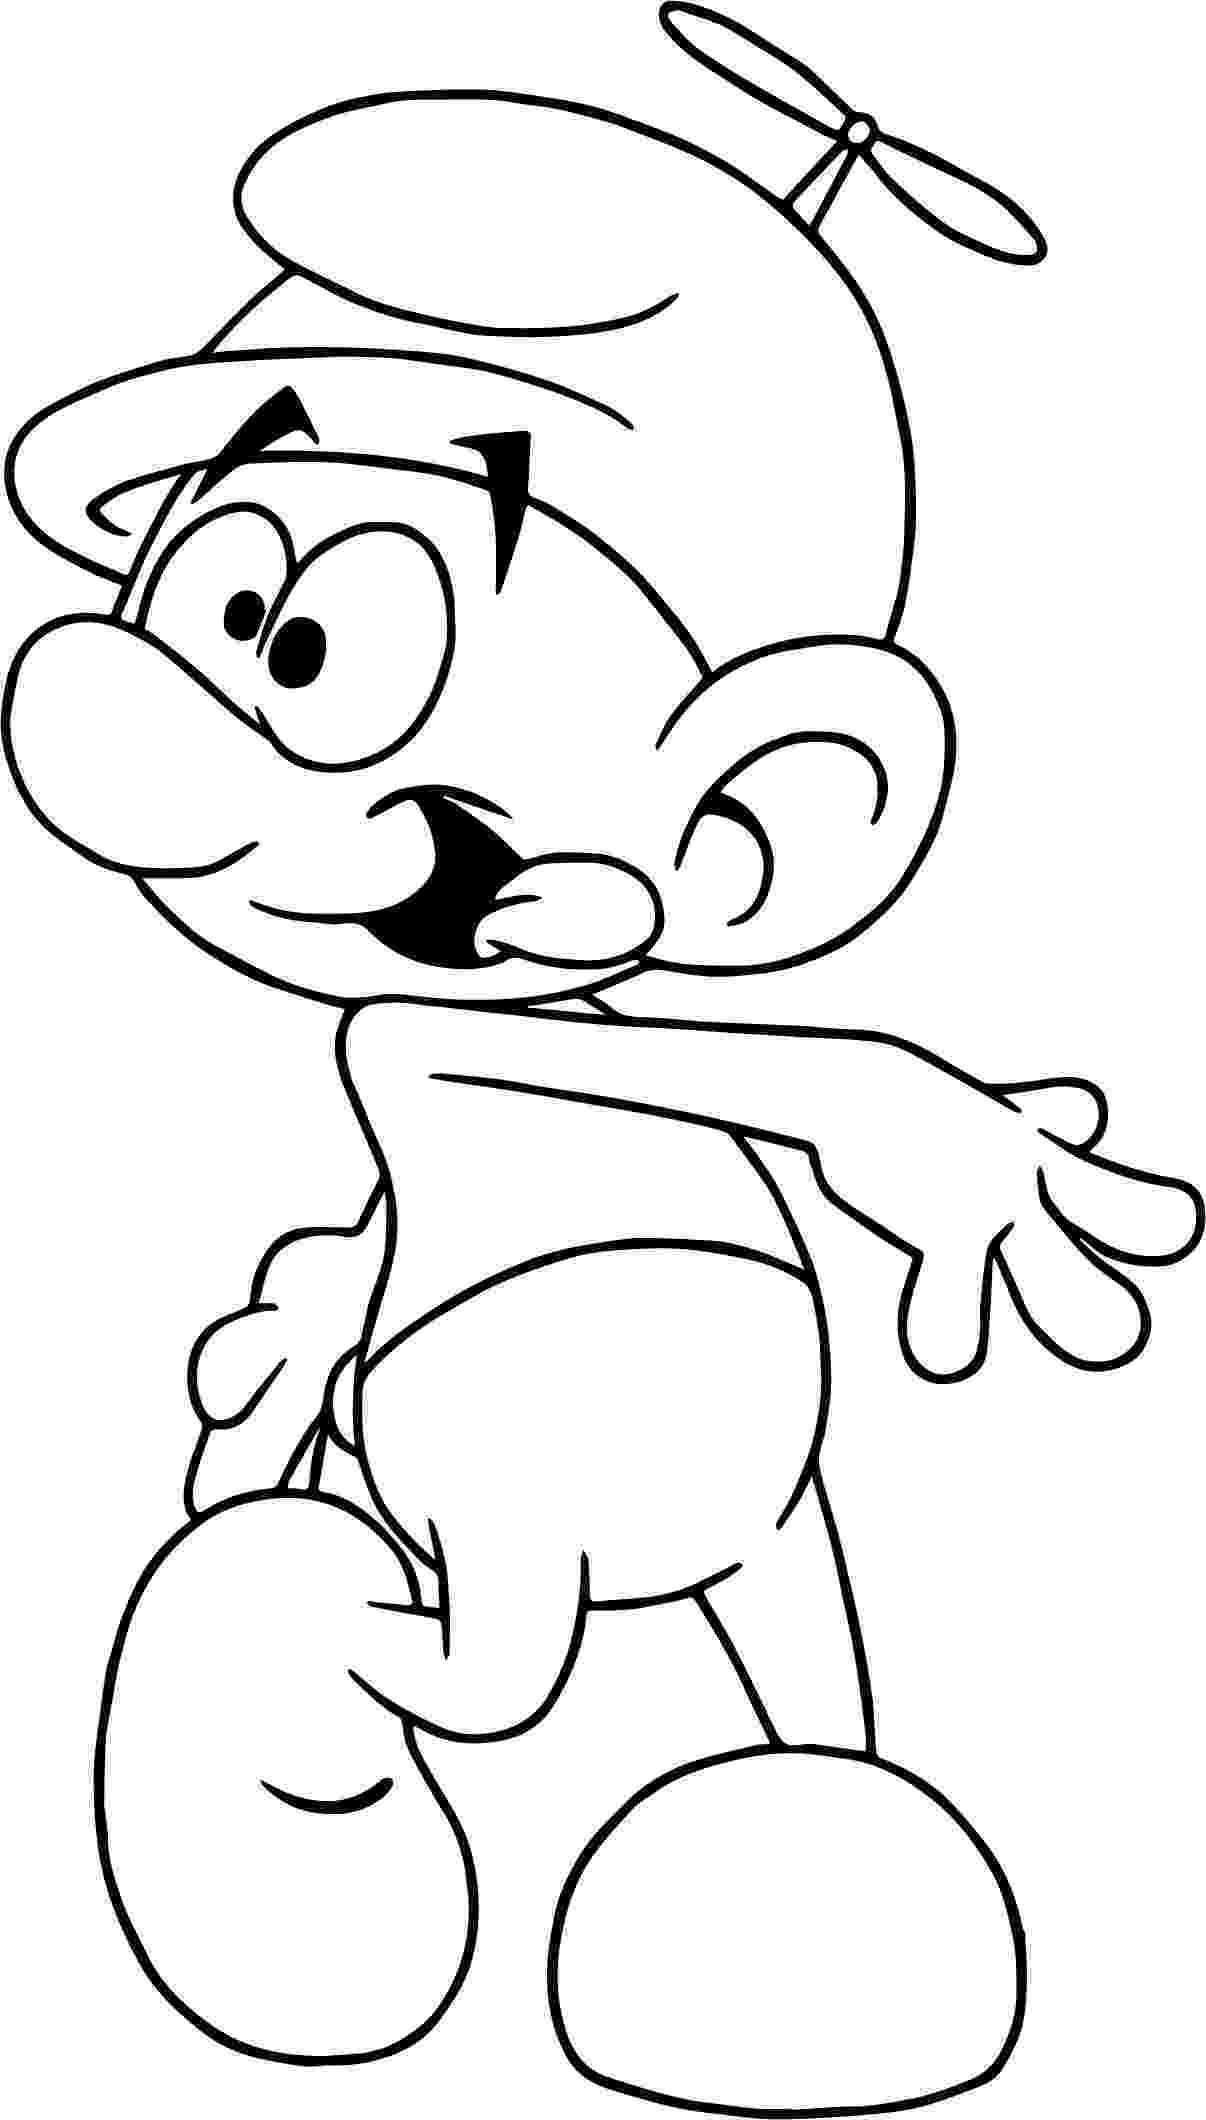 smurf pictures 5 picture of papa smurf coloring pages gtgt disney coloring pictures smurf 